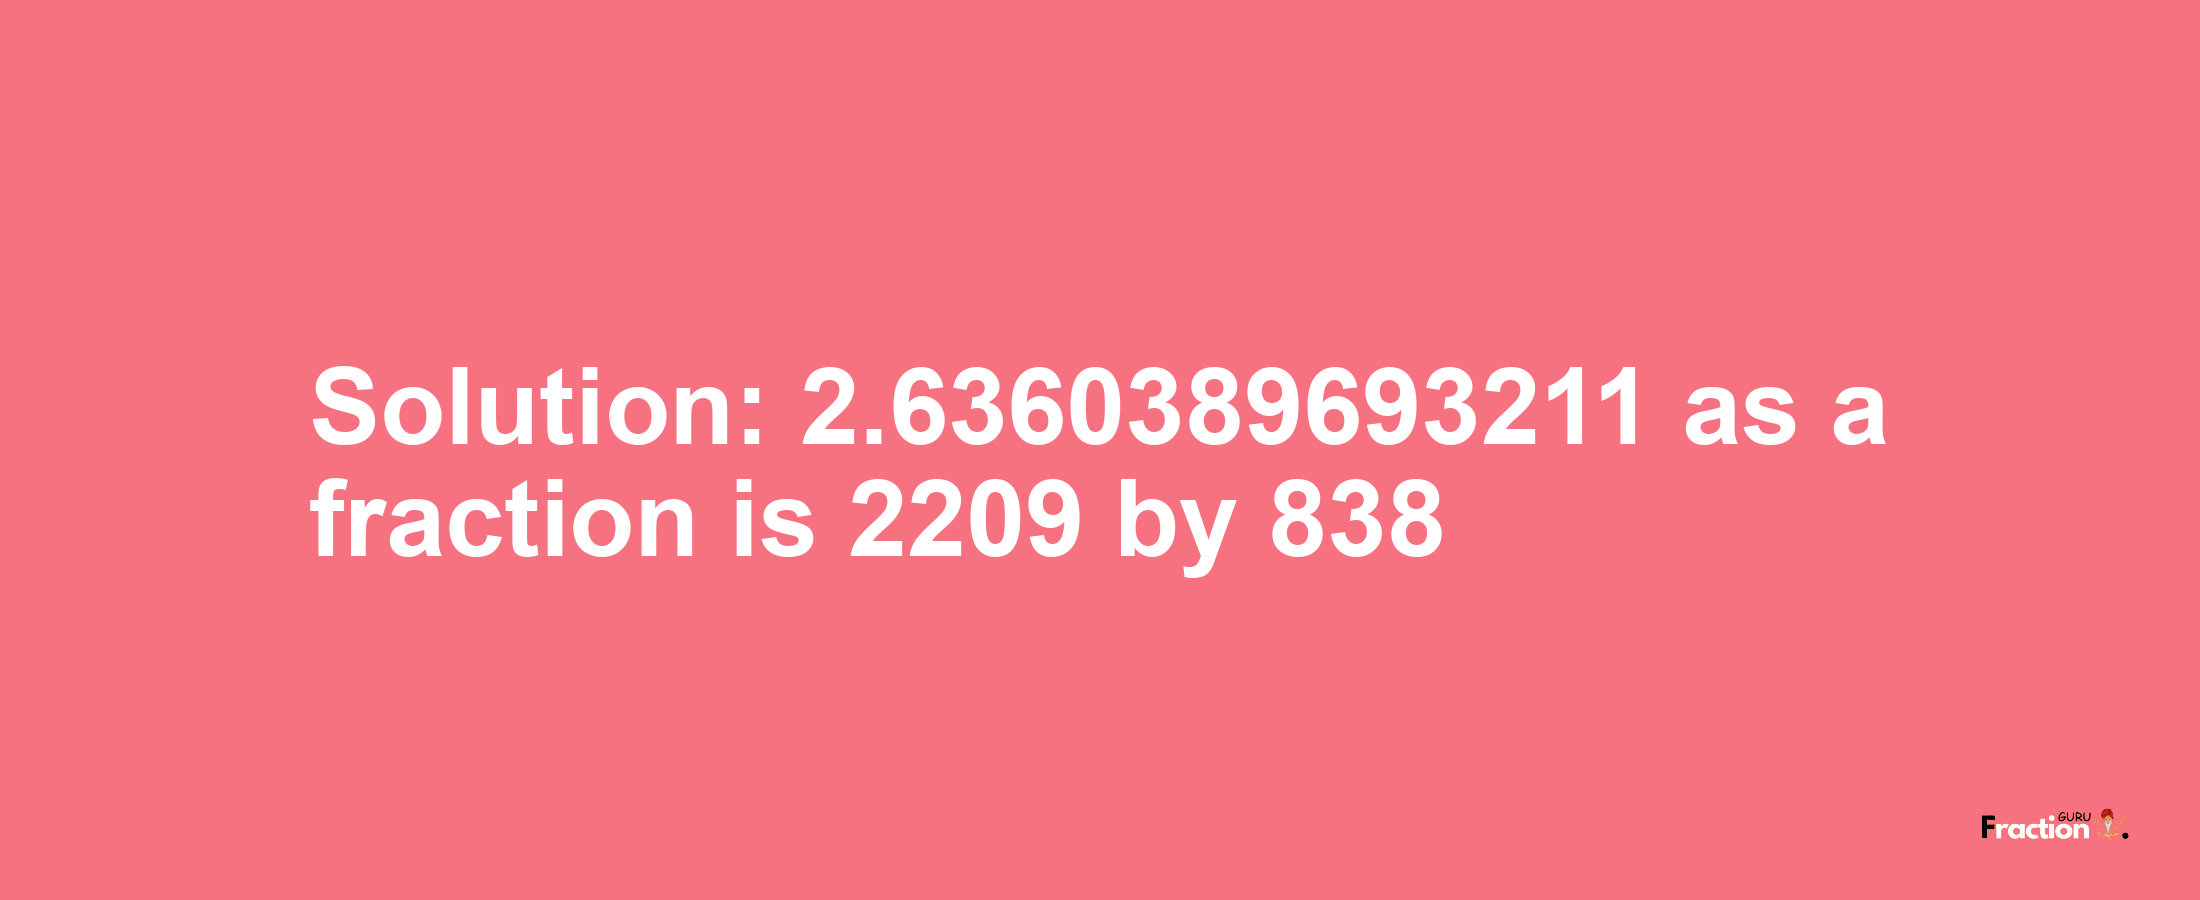 Solution:2.6360389693211 as a fraction is 2209/838